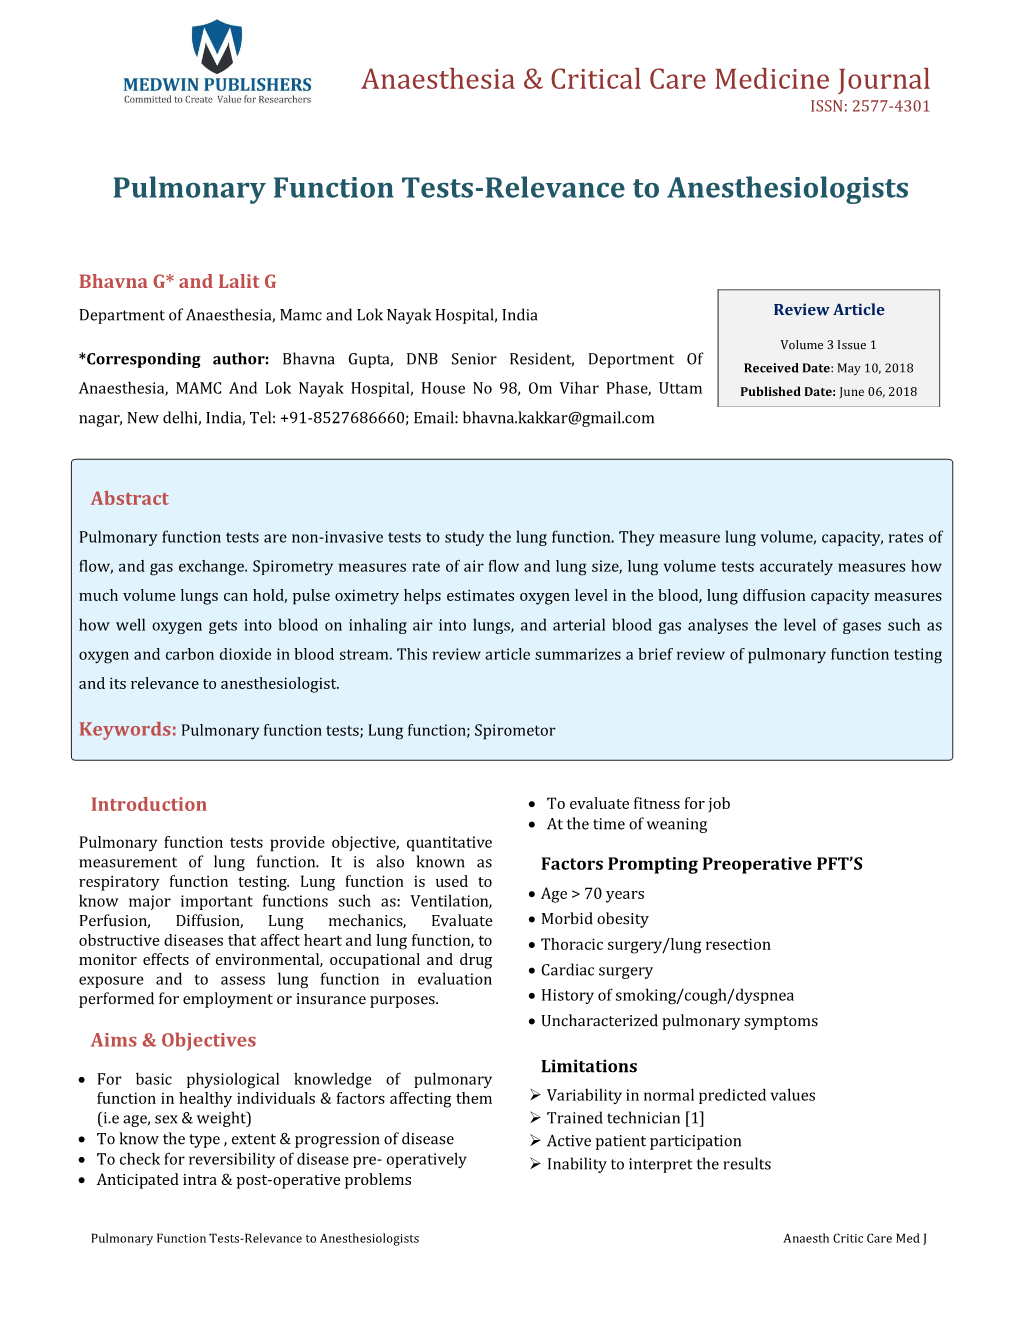 Pulmonary Function Tests-Relevance to Anesthesiologists